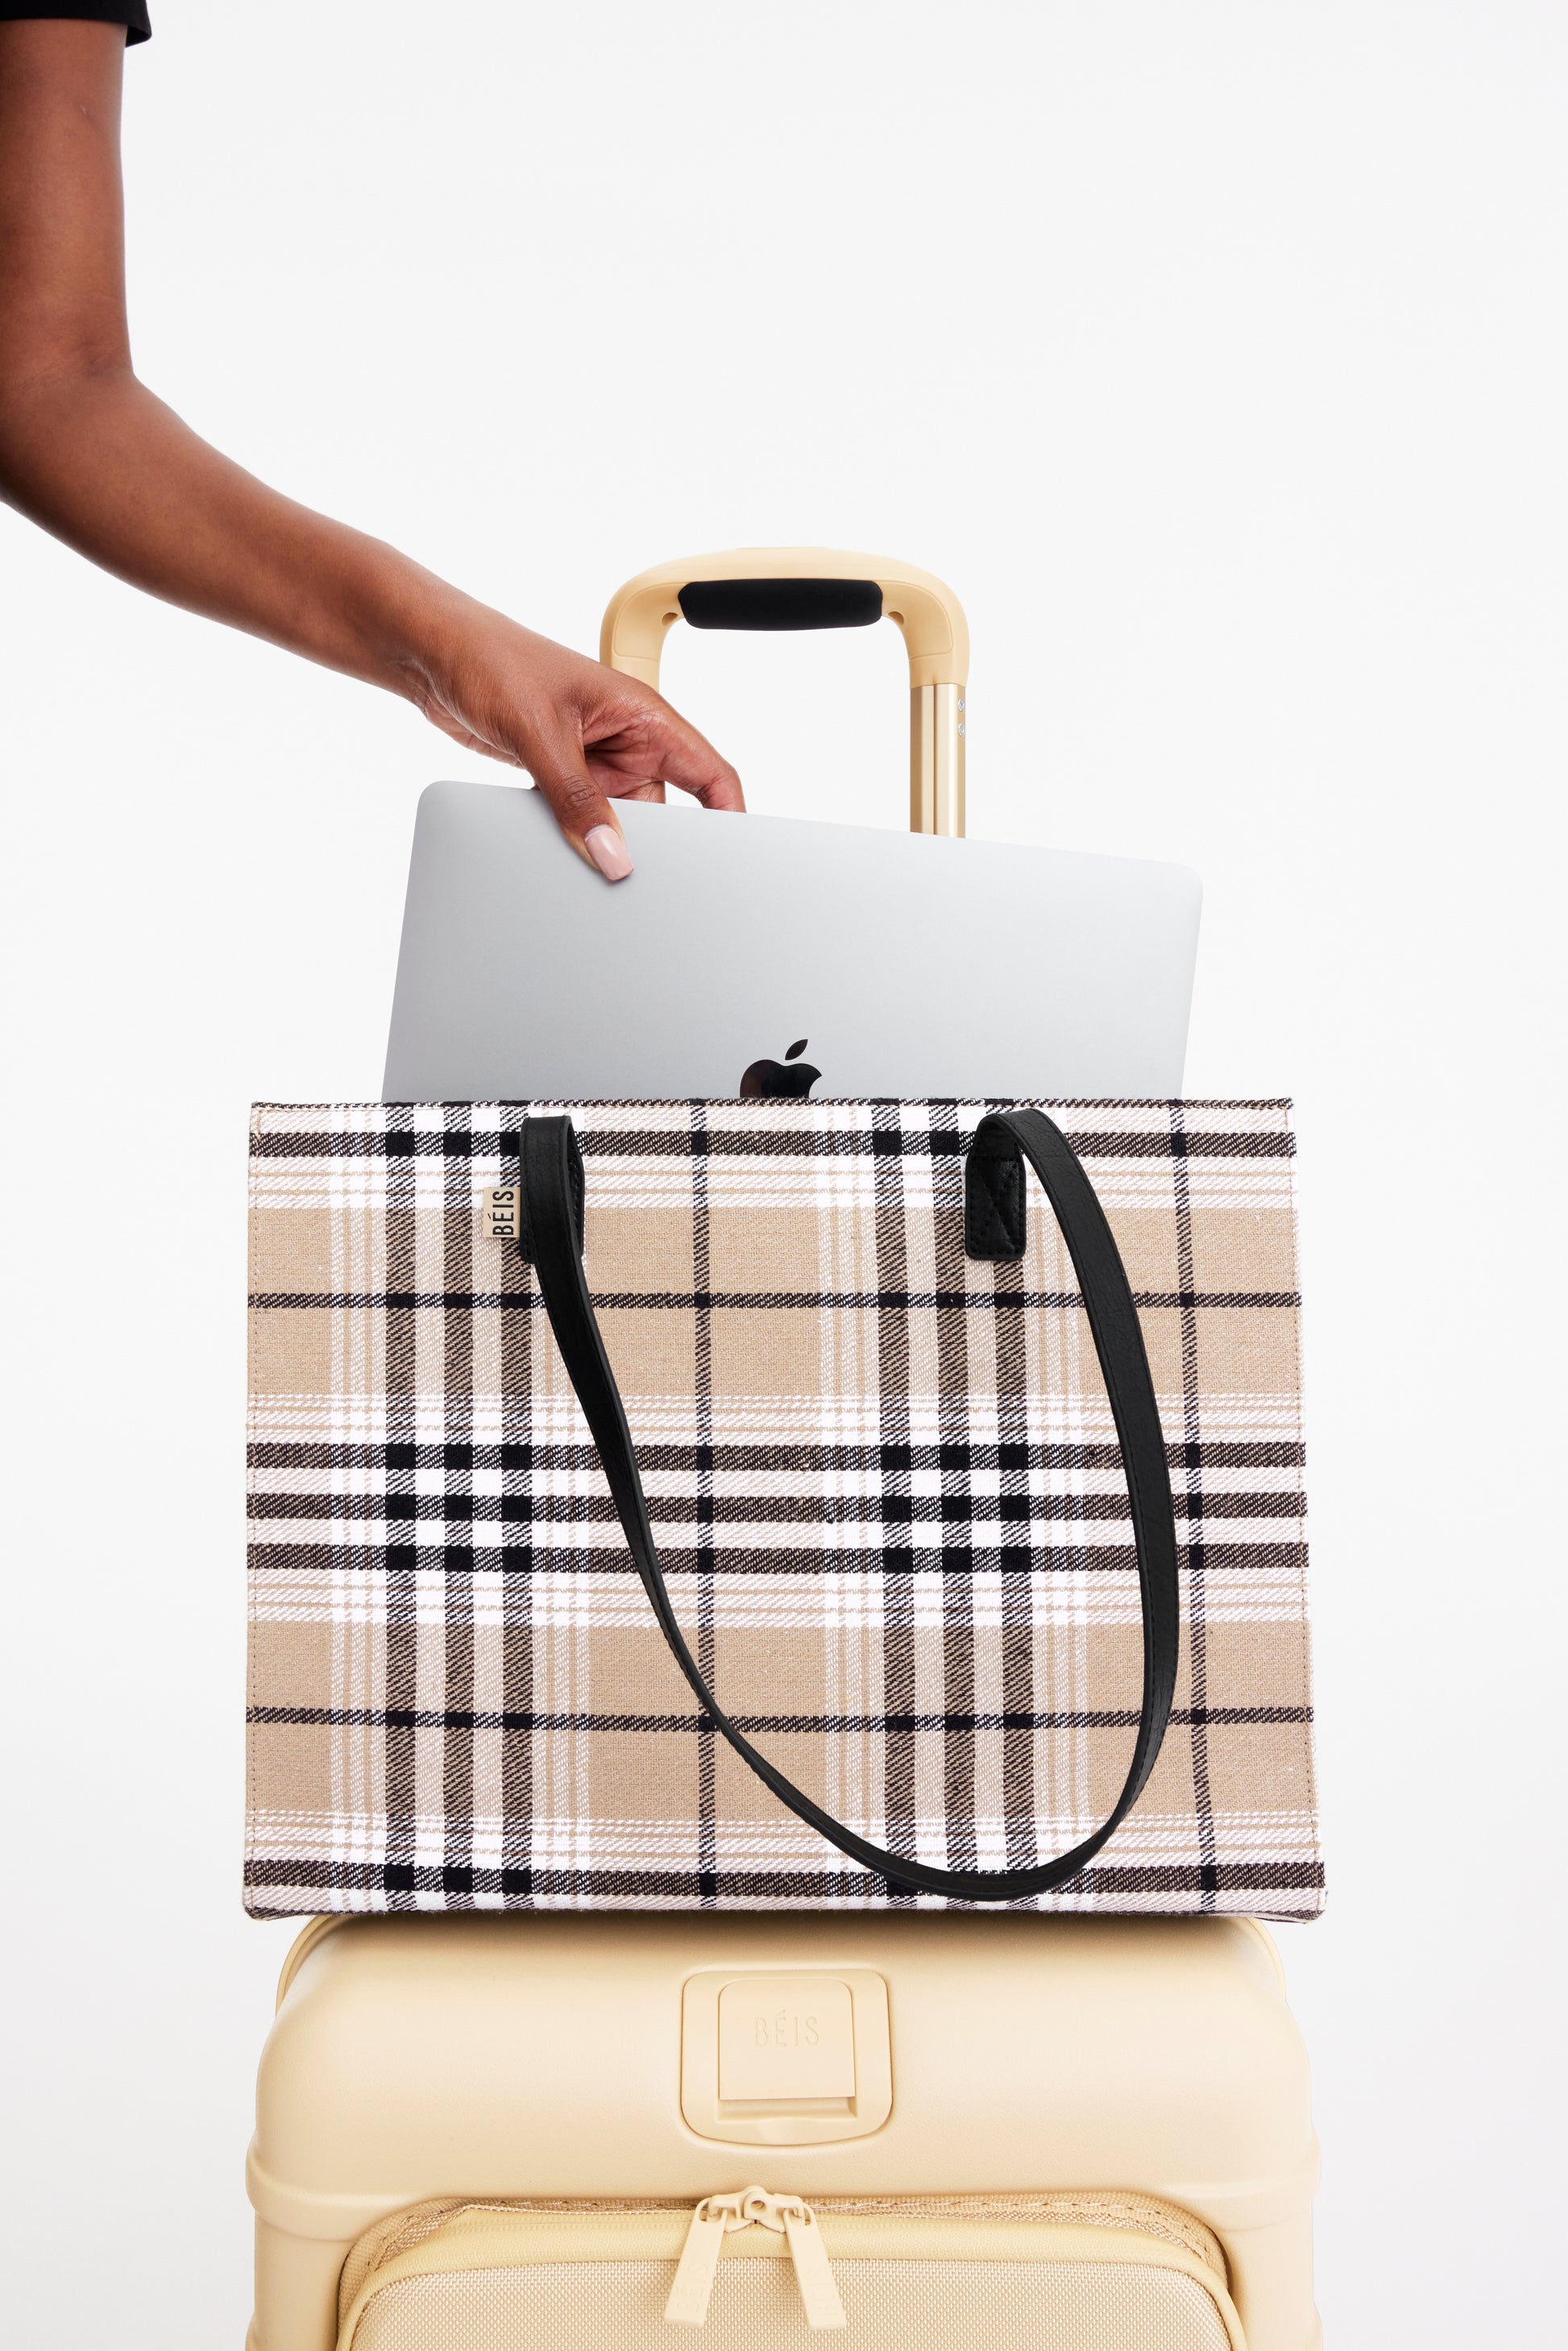 The Best Work Bags for Women  Classic Totes and Luxury Splurges for the  Office